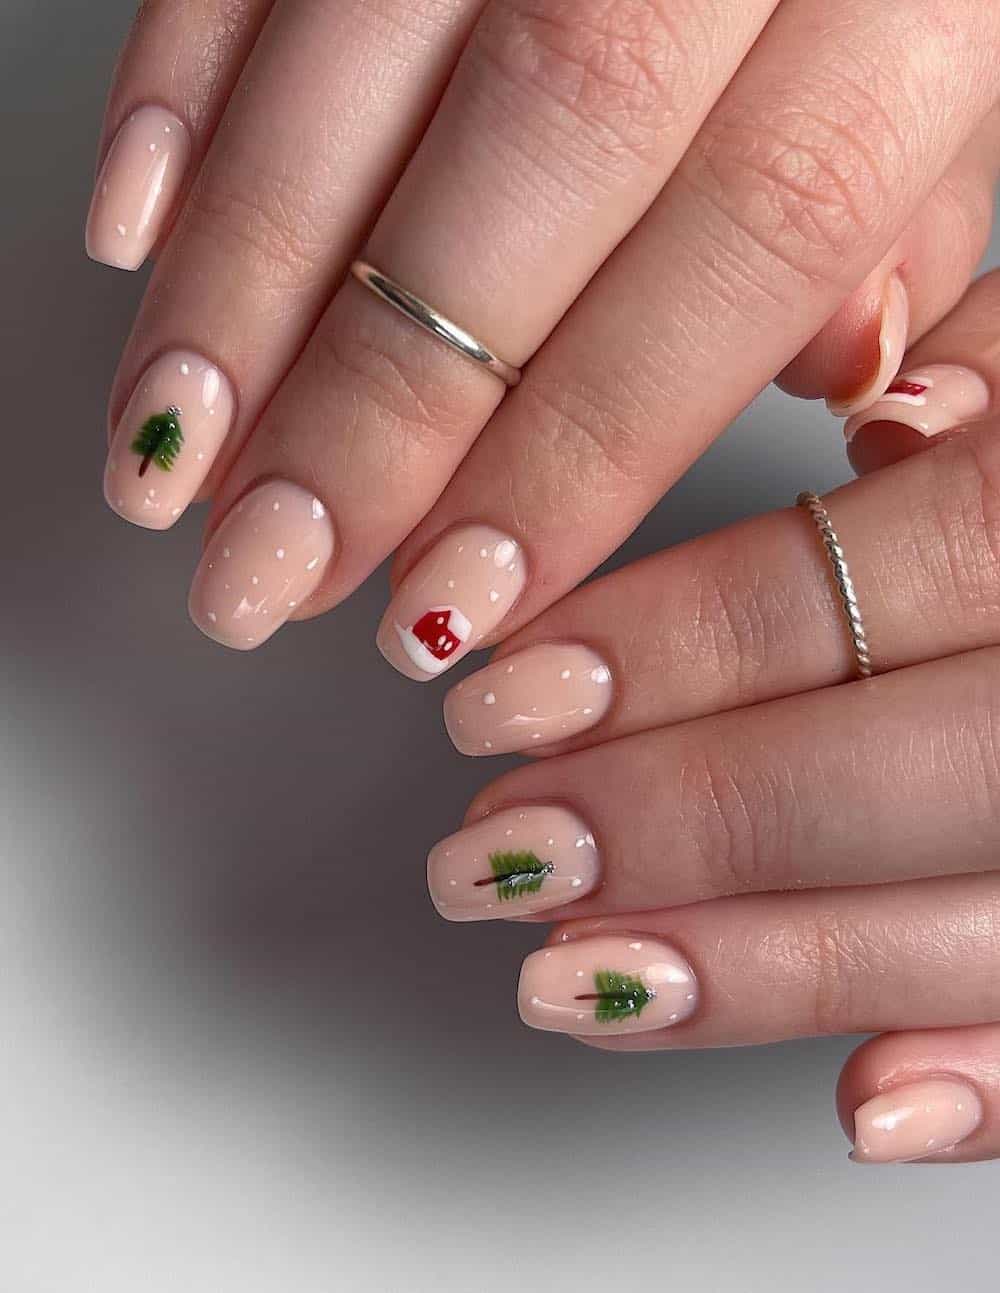 A hand with short square nails painted nude with white snow dot accents and nail art of a red house and Christmas trees